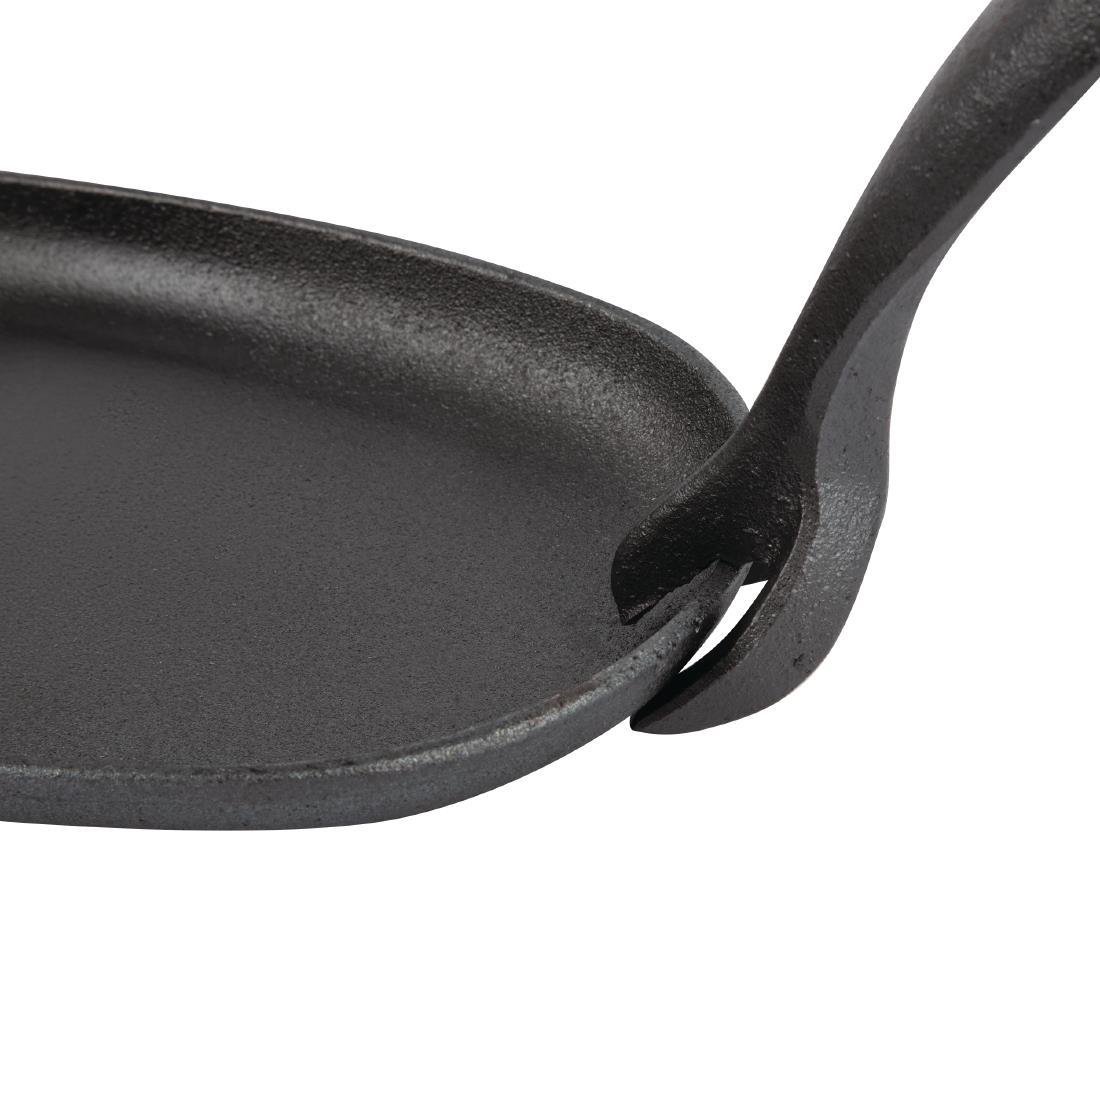 Olympia Cast Iron Sizzler Pan - GG133  - 3